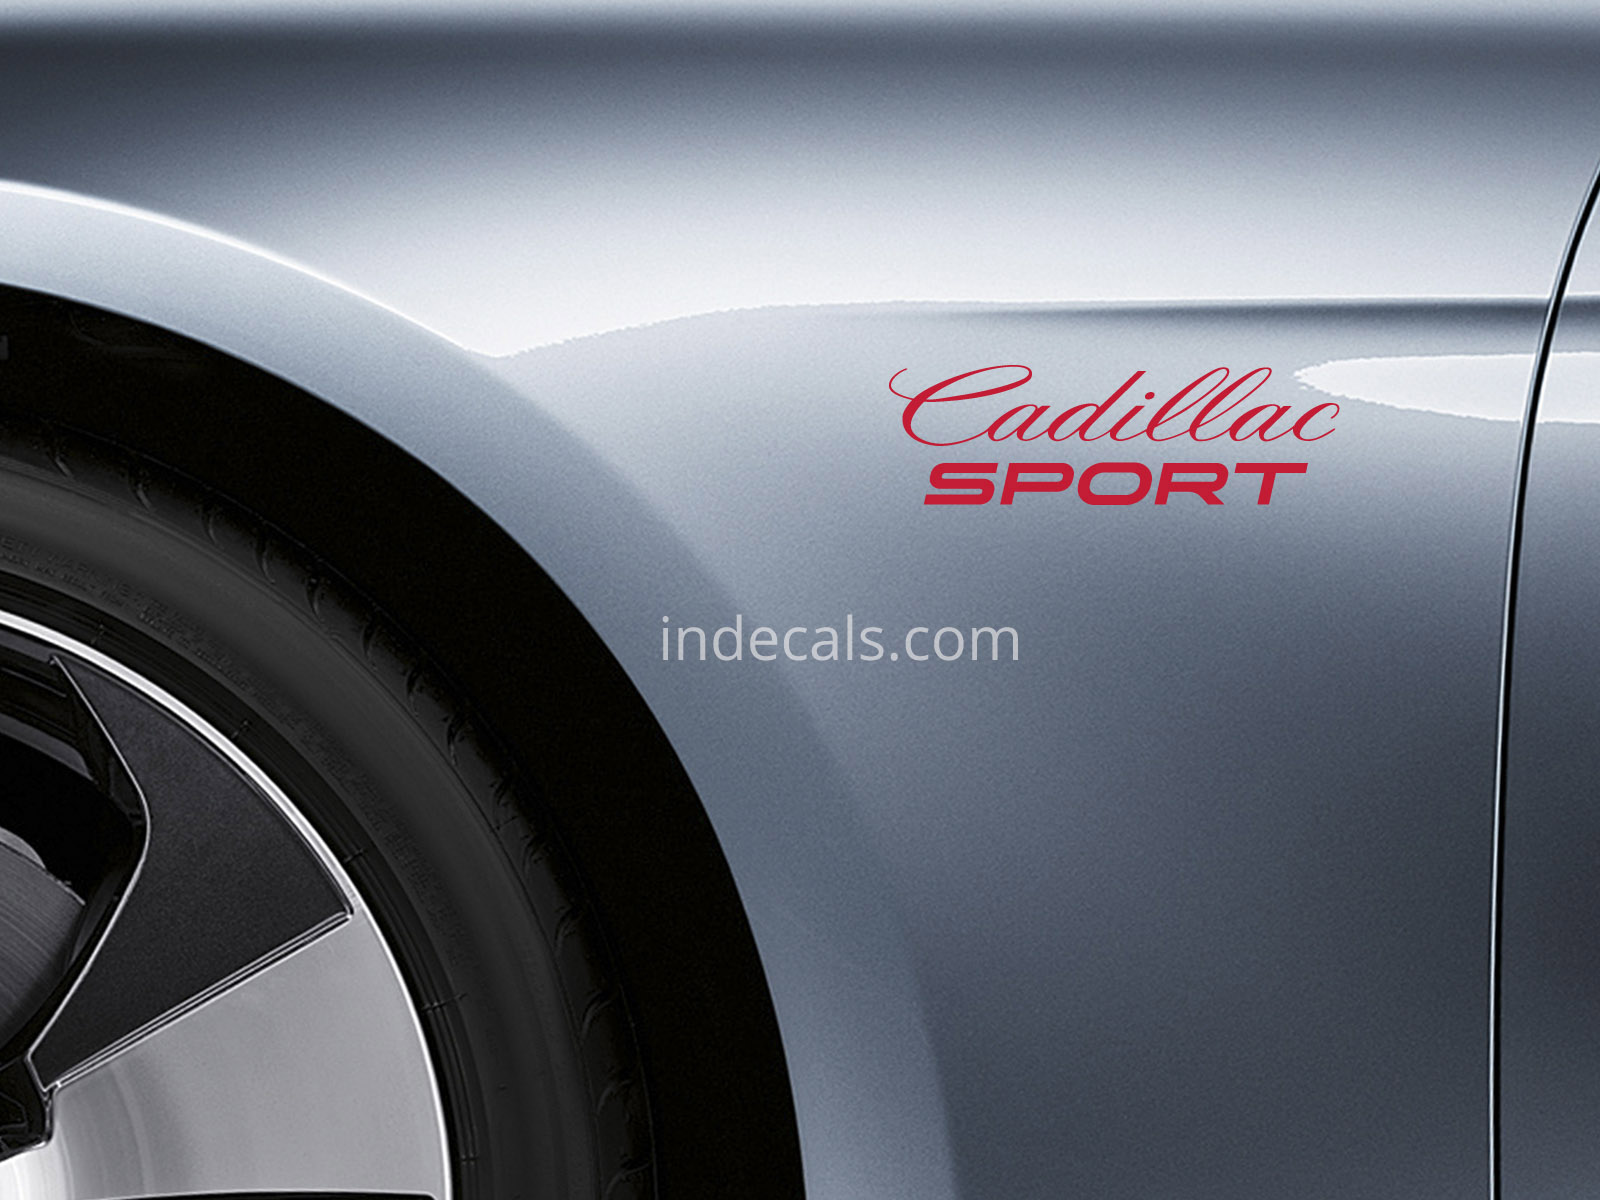 2 x Cadillac Sports stickers for Wings - Red